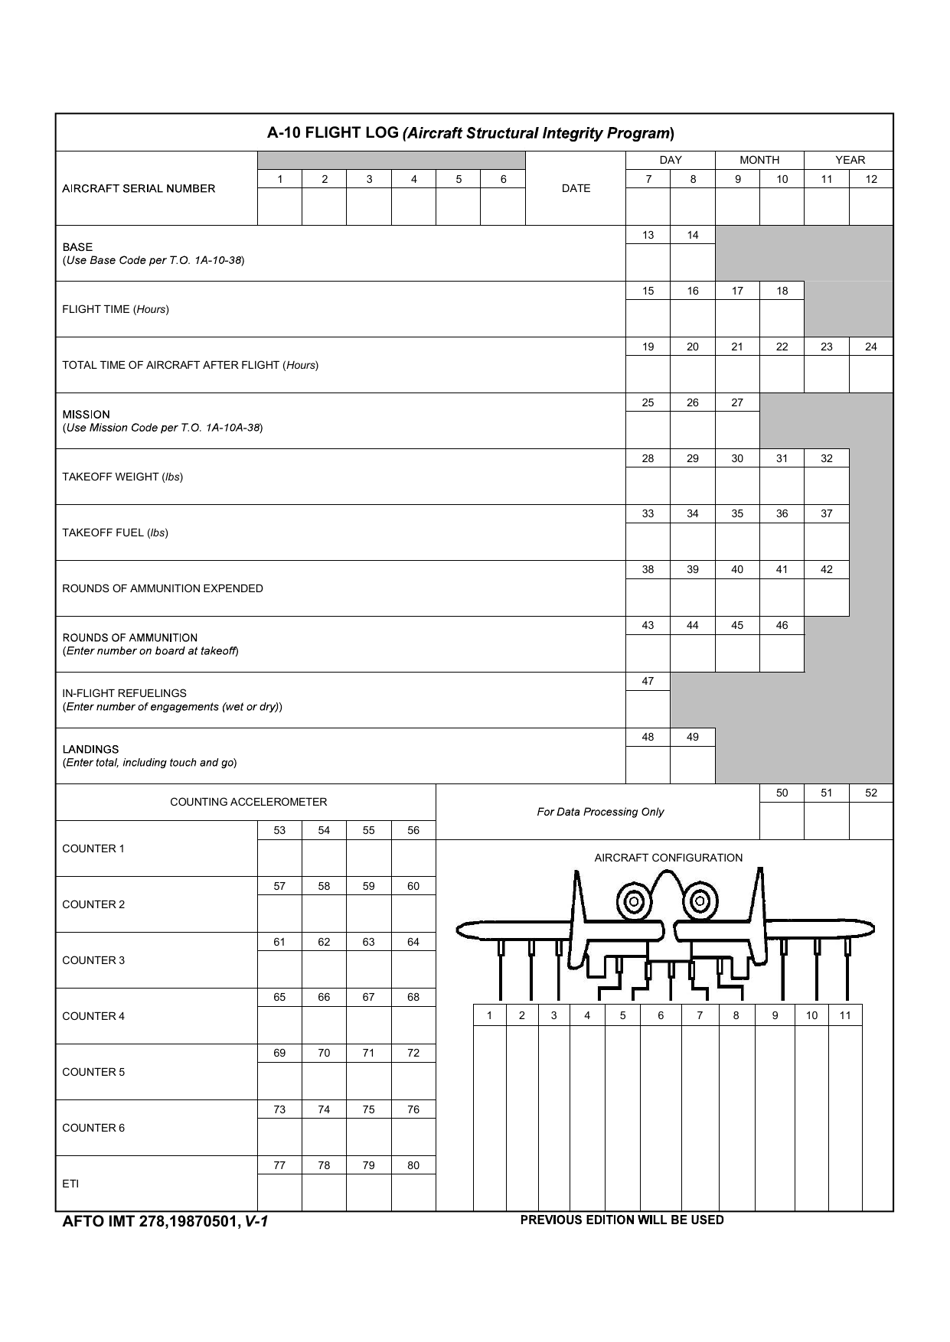 AFTO IMT Form 278 A-10 Flight Log, Page 1